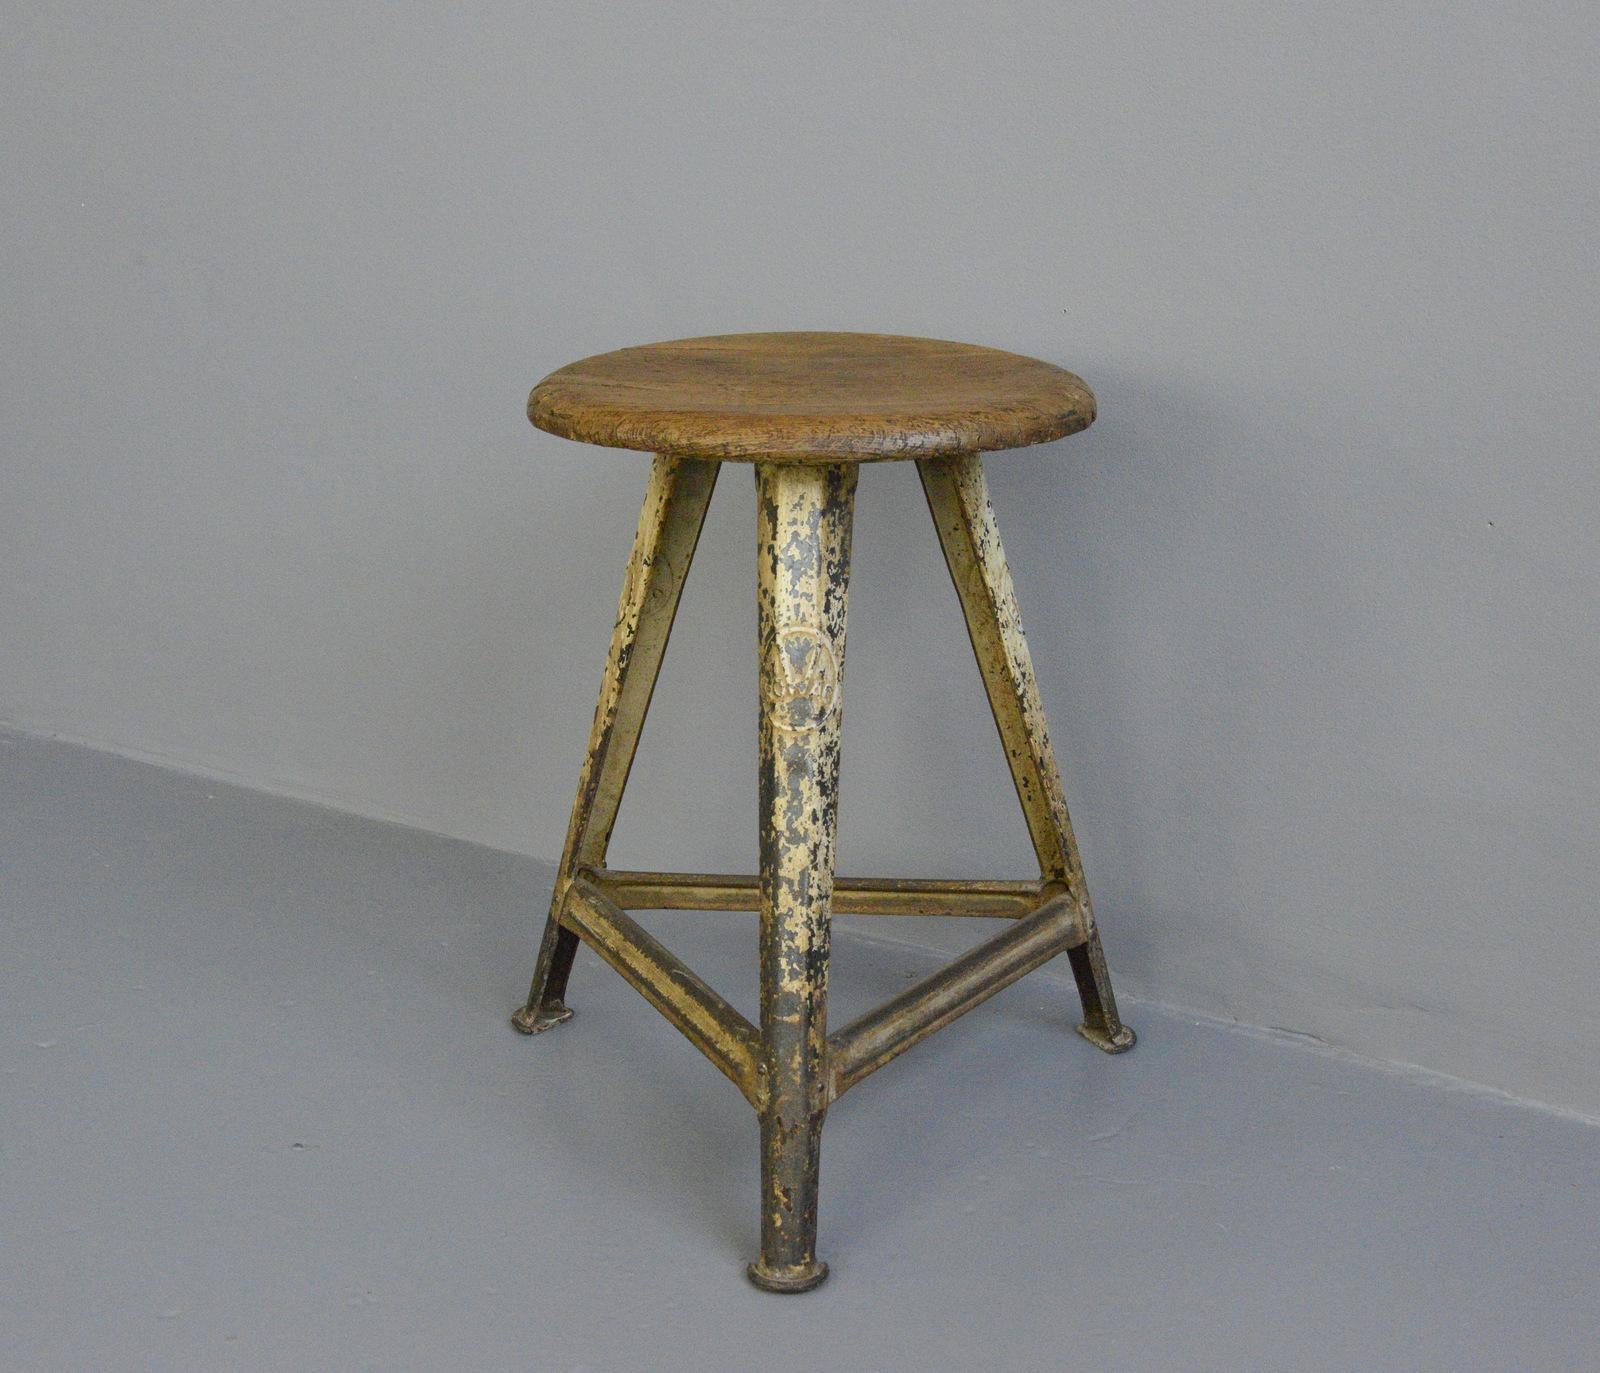 Industrial factory stool by Rowac, circa 1920s

- Original crackled cream paint
- Branded on all 3 legs
- By Robert Wagner, Chemnitz
- German, 1920s
- Measures: 51cm tall

Rowac

Robert Wagner’s founded his company in 1888 in Chemnitz,